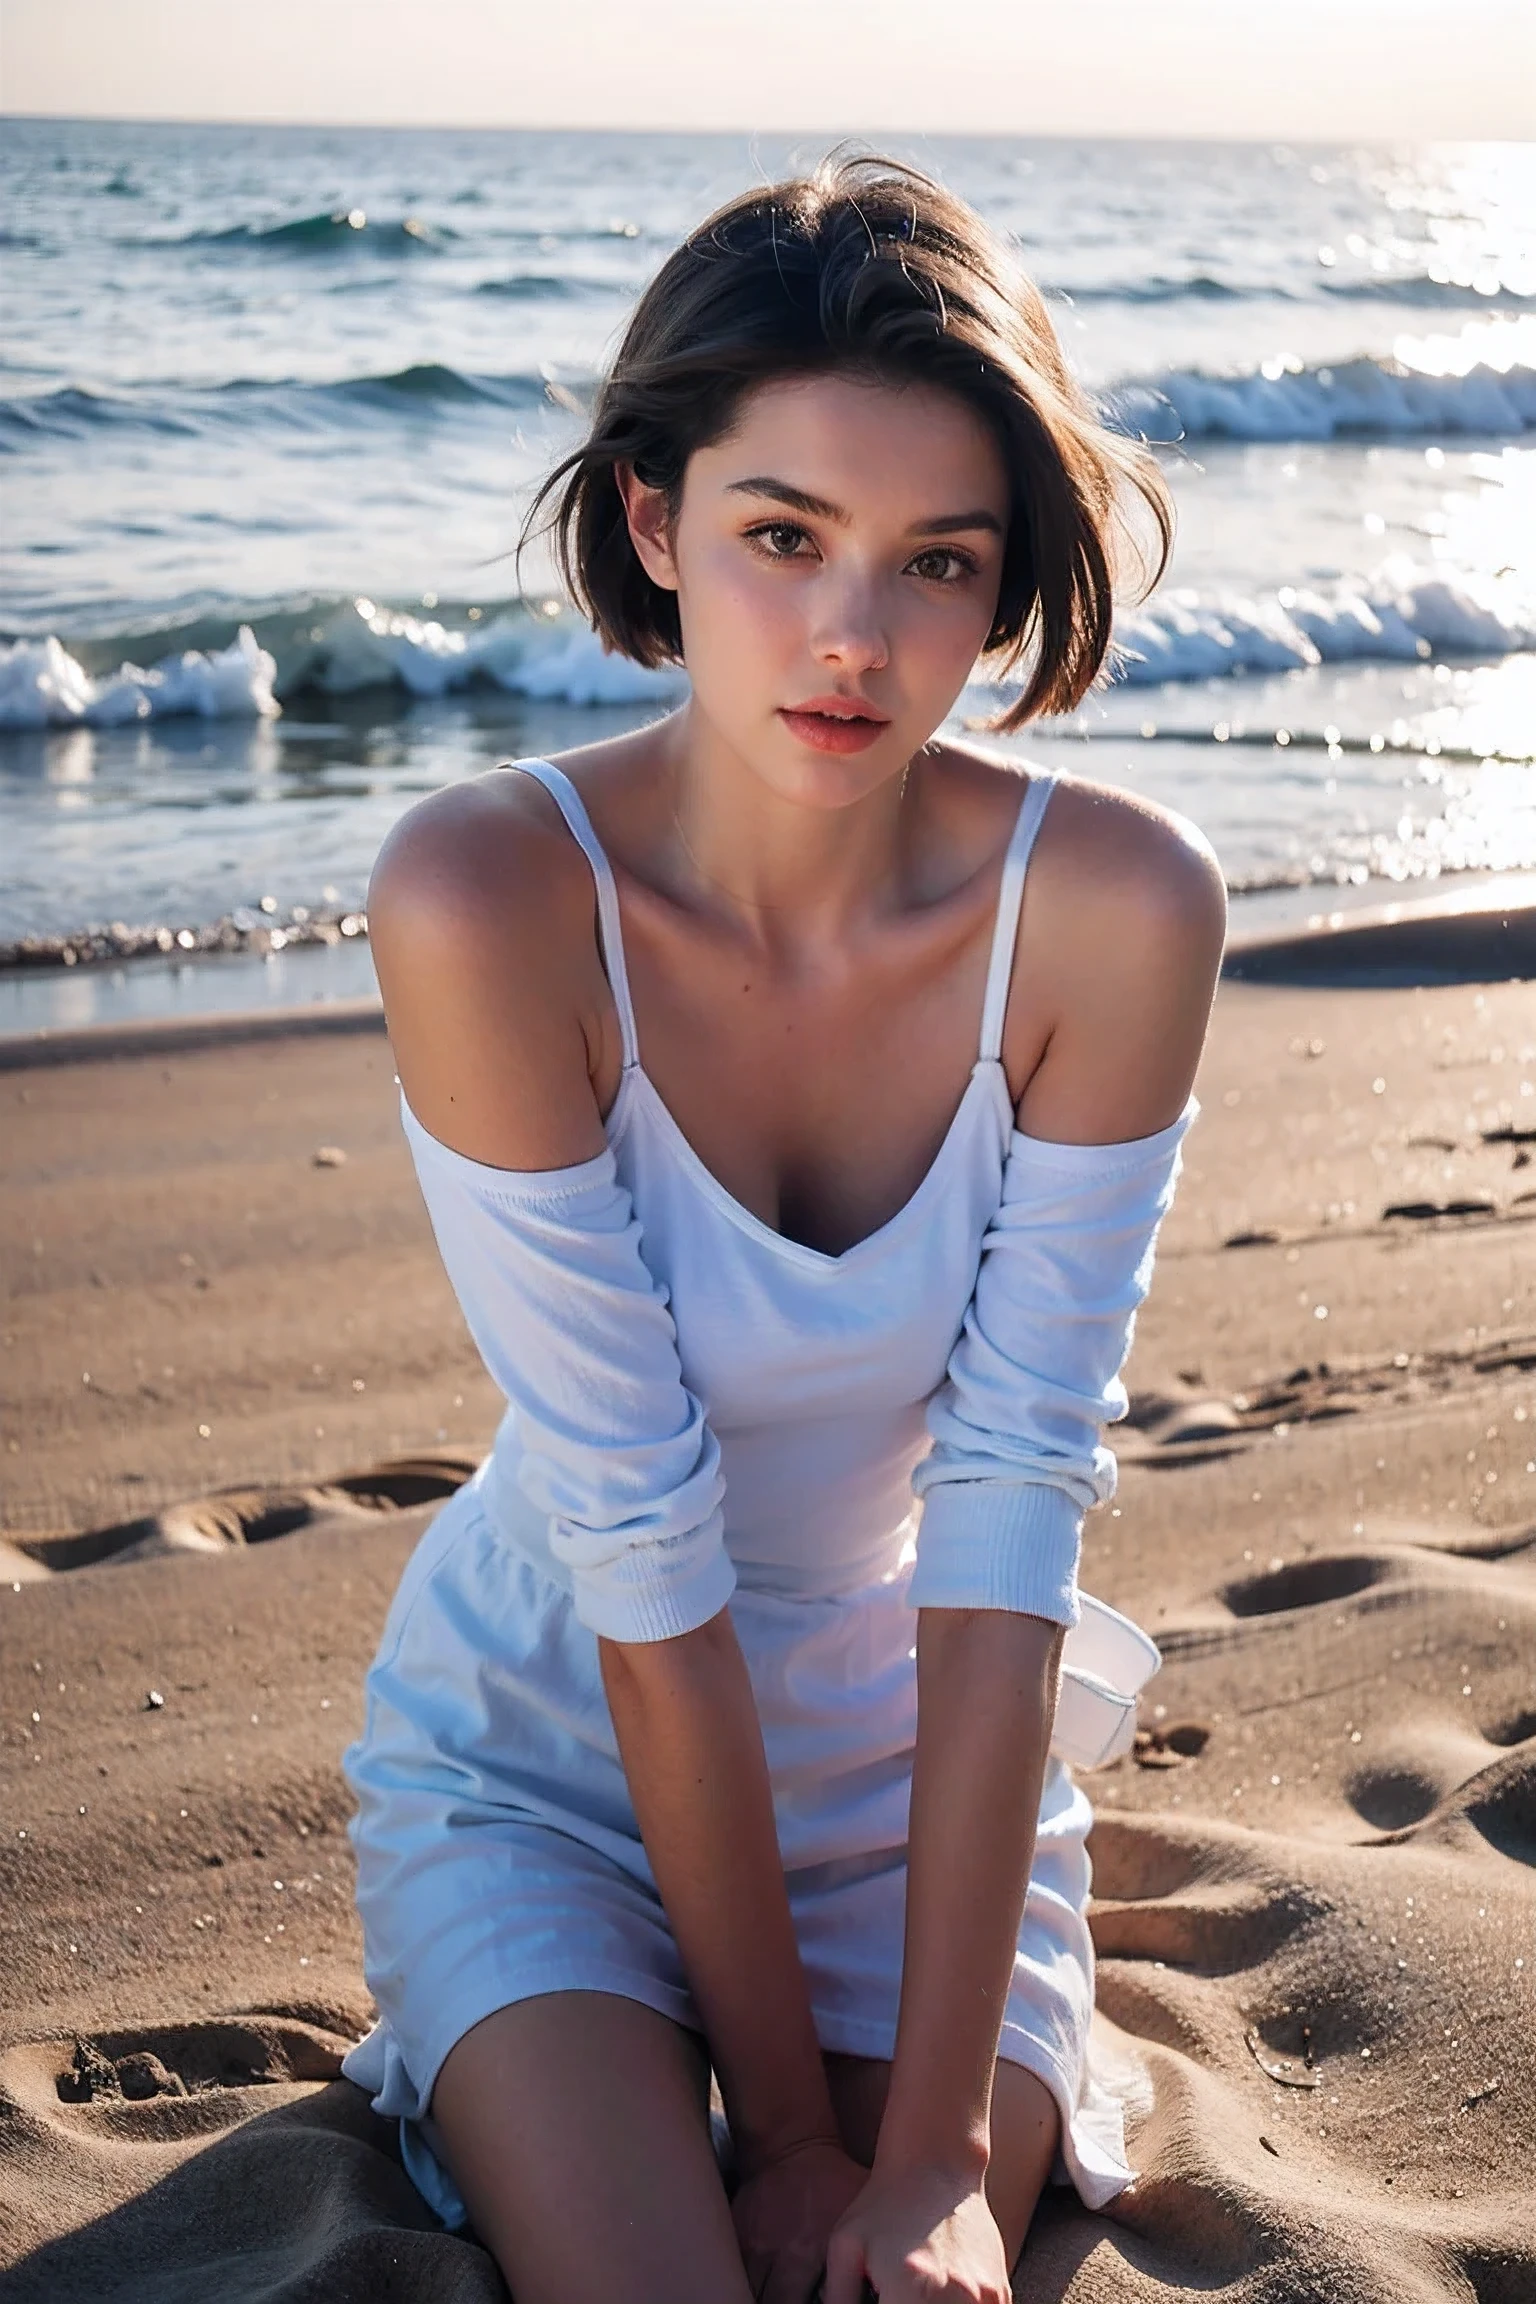 Realistic Photography, Beautiful Young Female ,Short hair ,beach